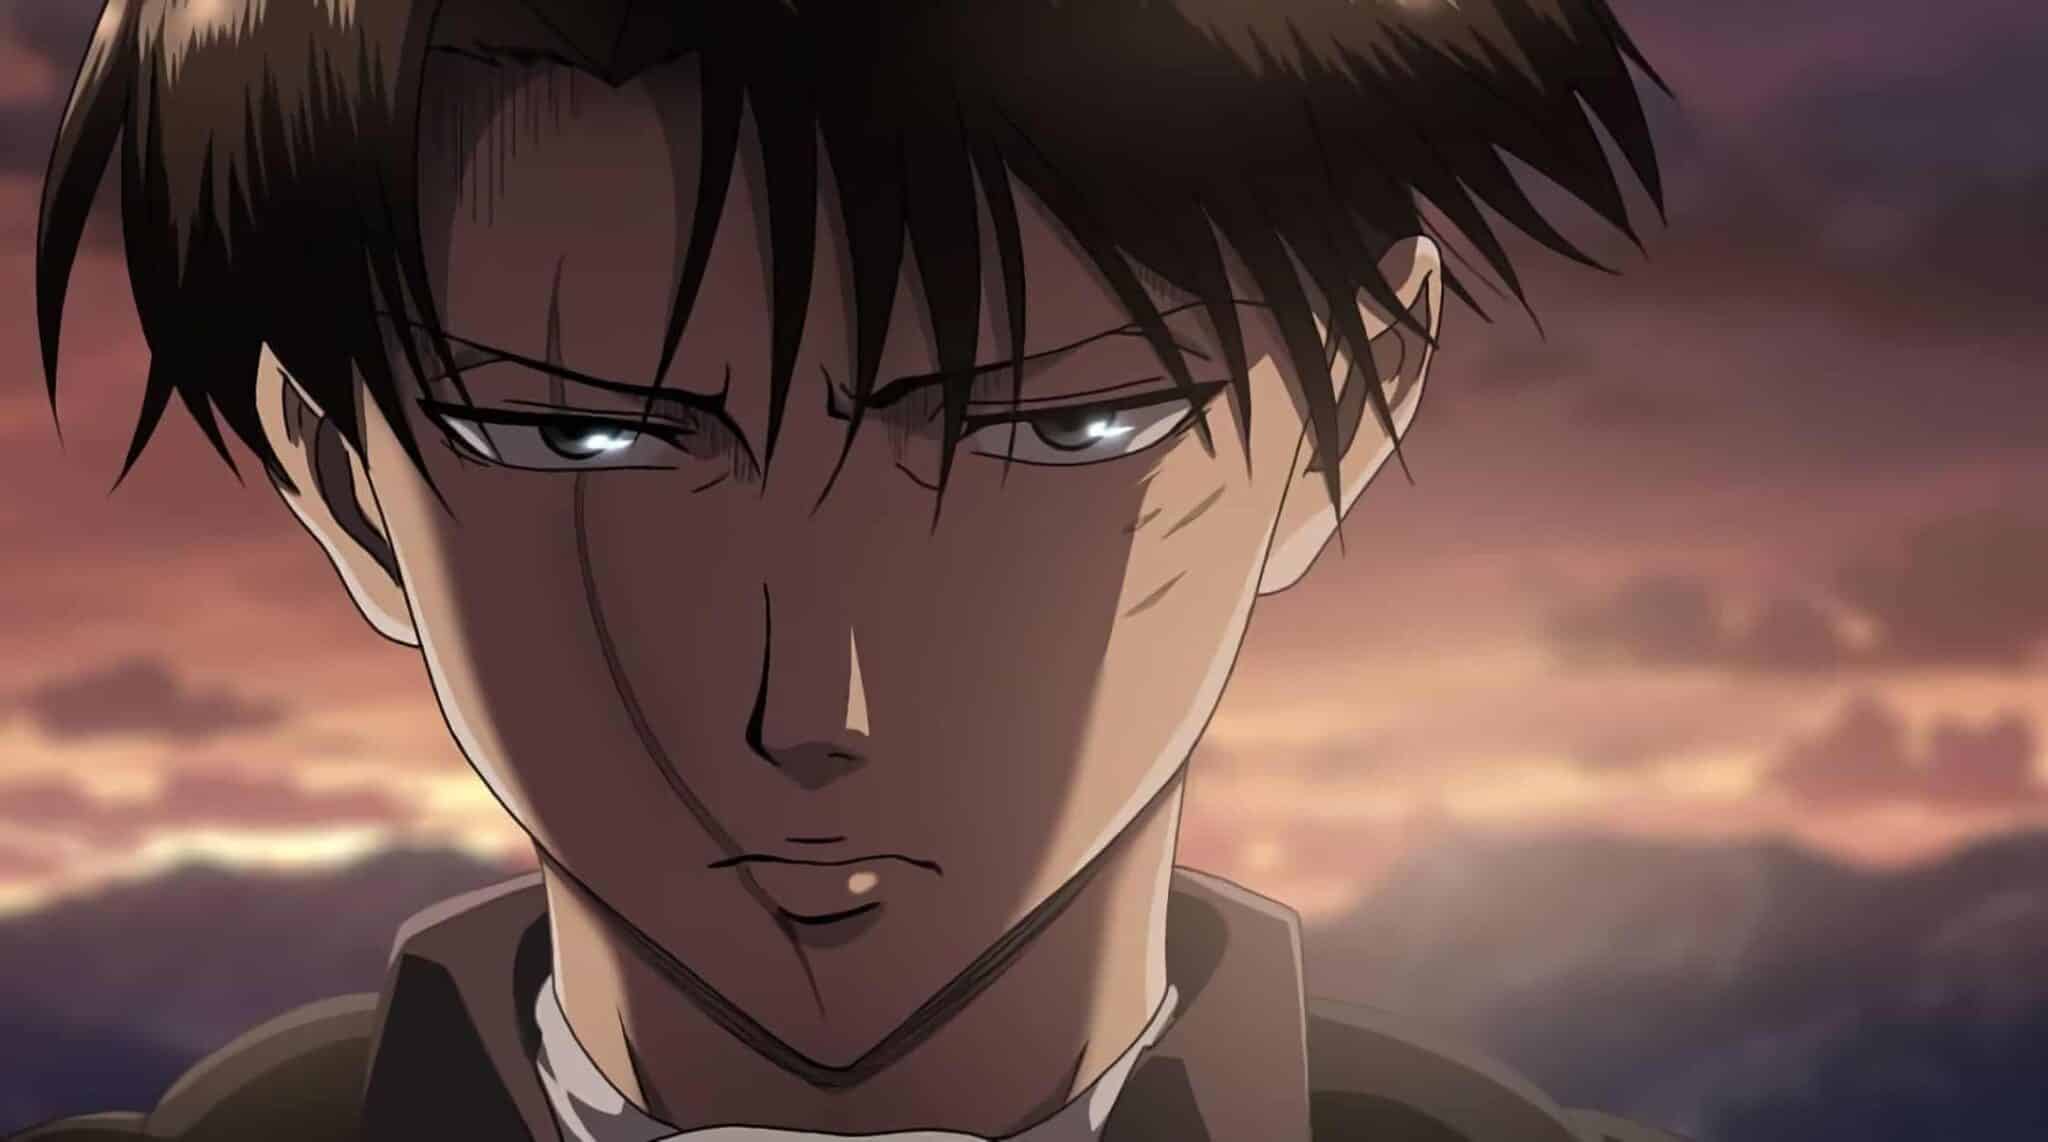 6. "Levi Ackerman" from Attack on Titan - wide 7